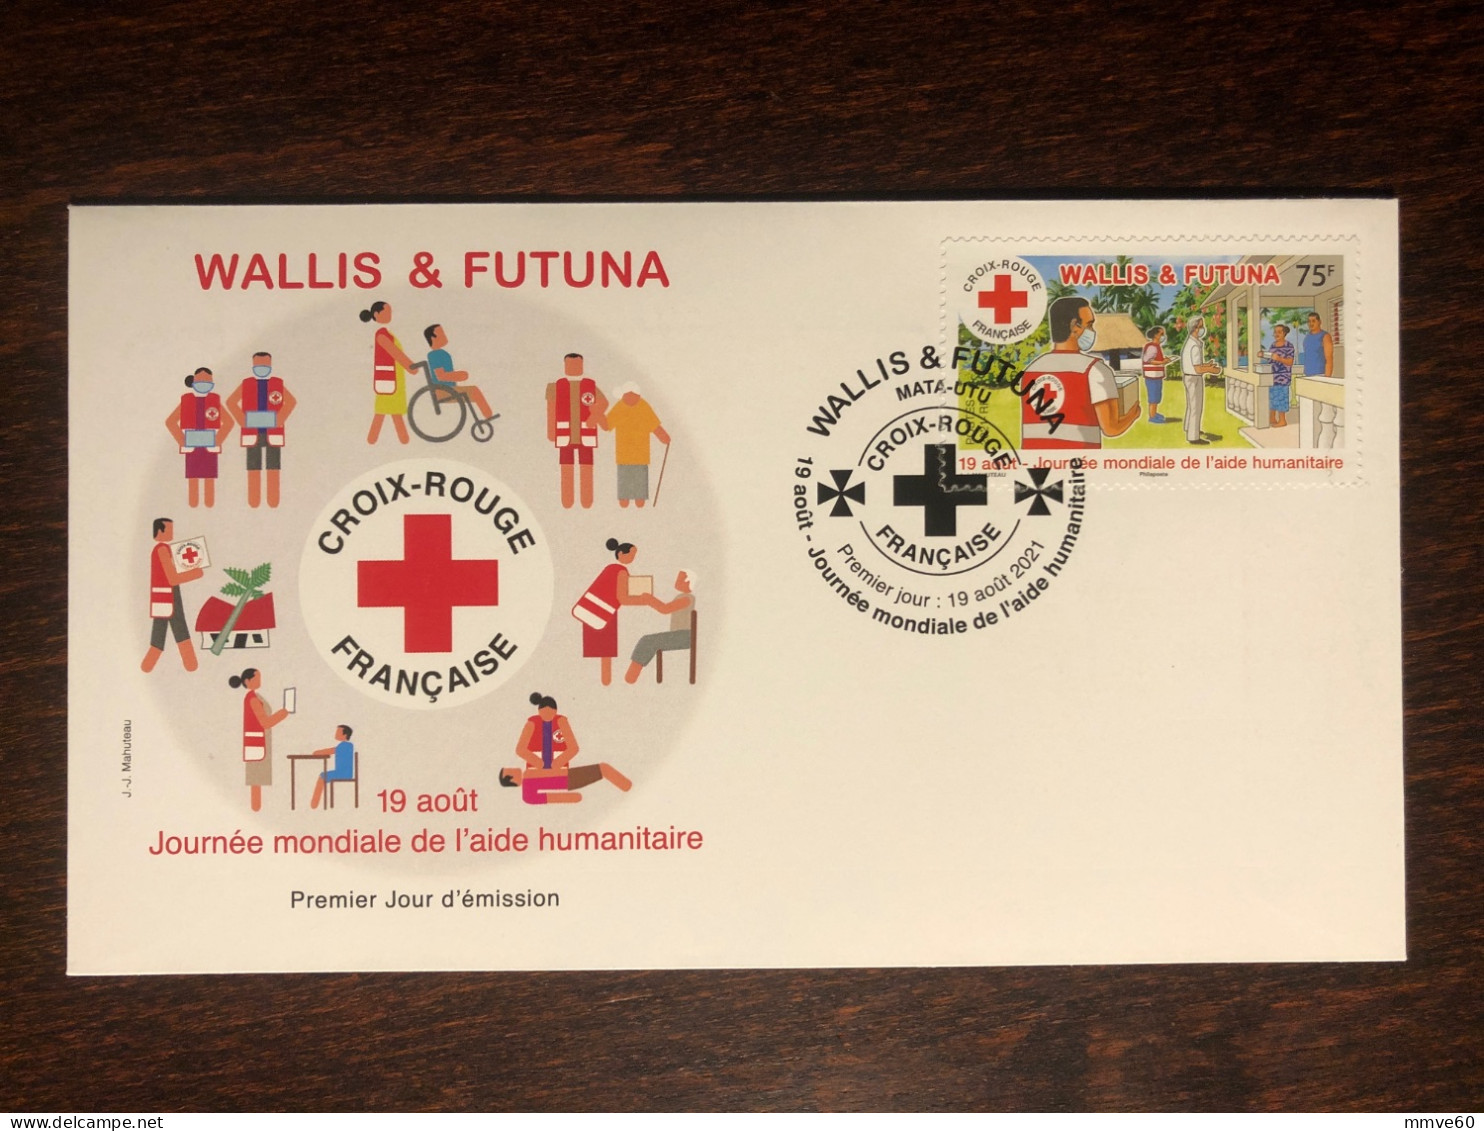 WALLIS & FUTUNA FDC COVER 2021 YEAR RED CROSS HEALTH MEDICINE STAMPS - Lettres & Documents